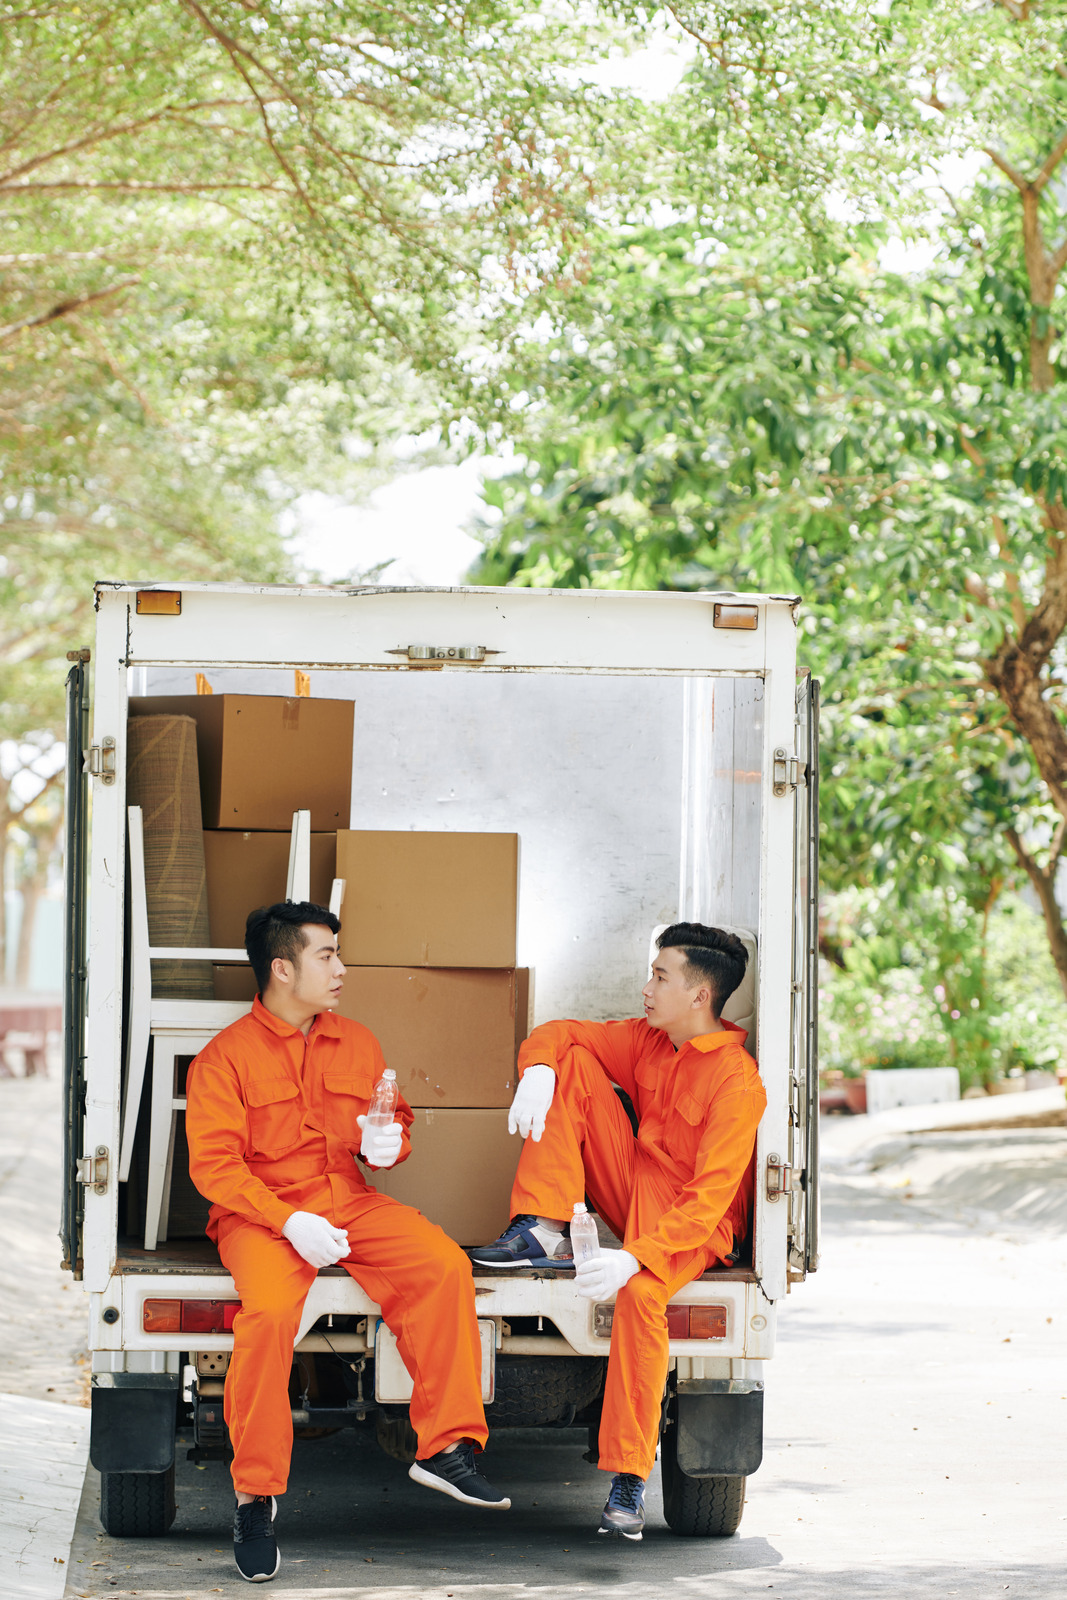 Moving Company Services